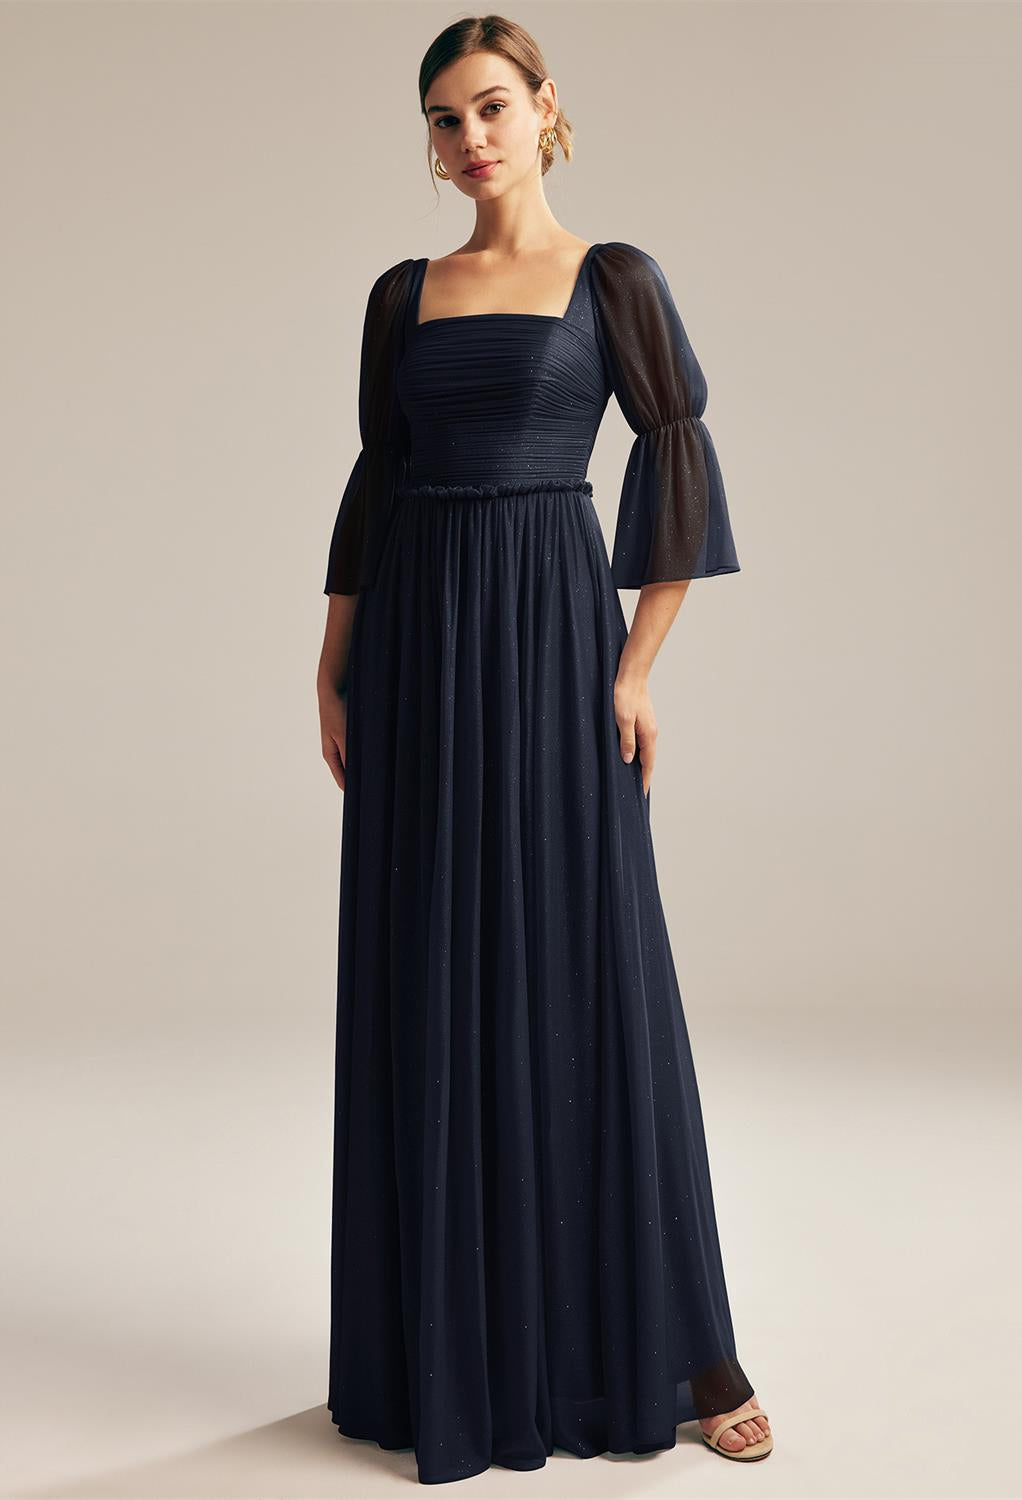 A Liza - Glitter Mesh plus size bridesmaid dress with sheer sleeves available at Bergamot Bridal shops in London.